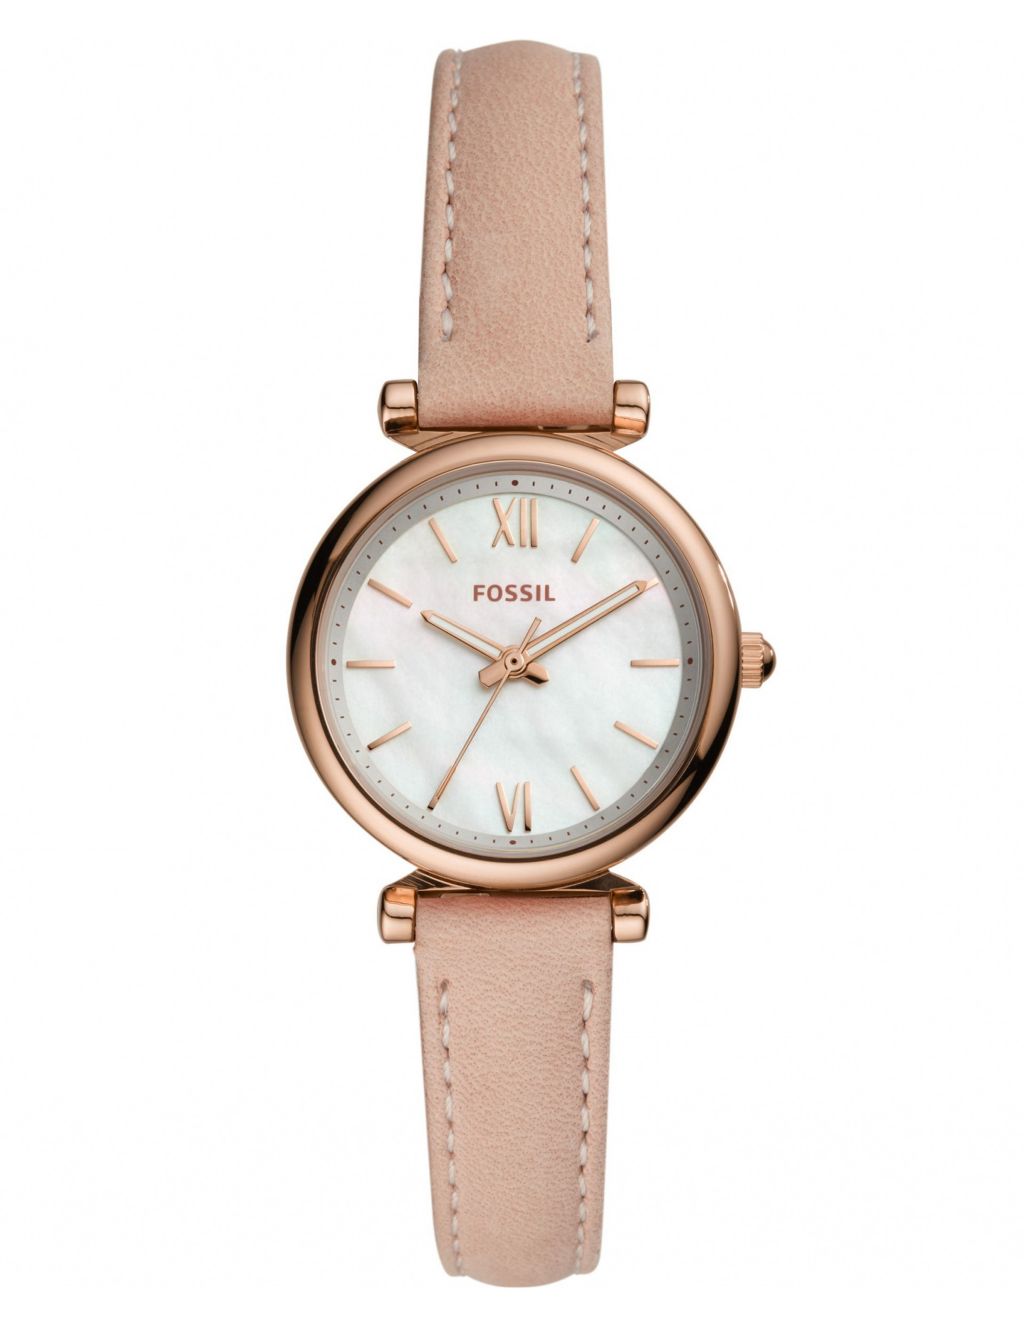 Fossil Carlie Nude Leather Watch image 1